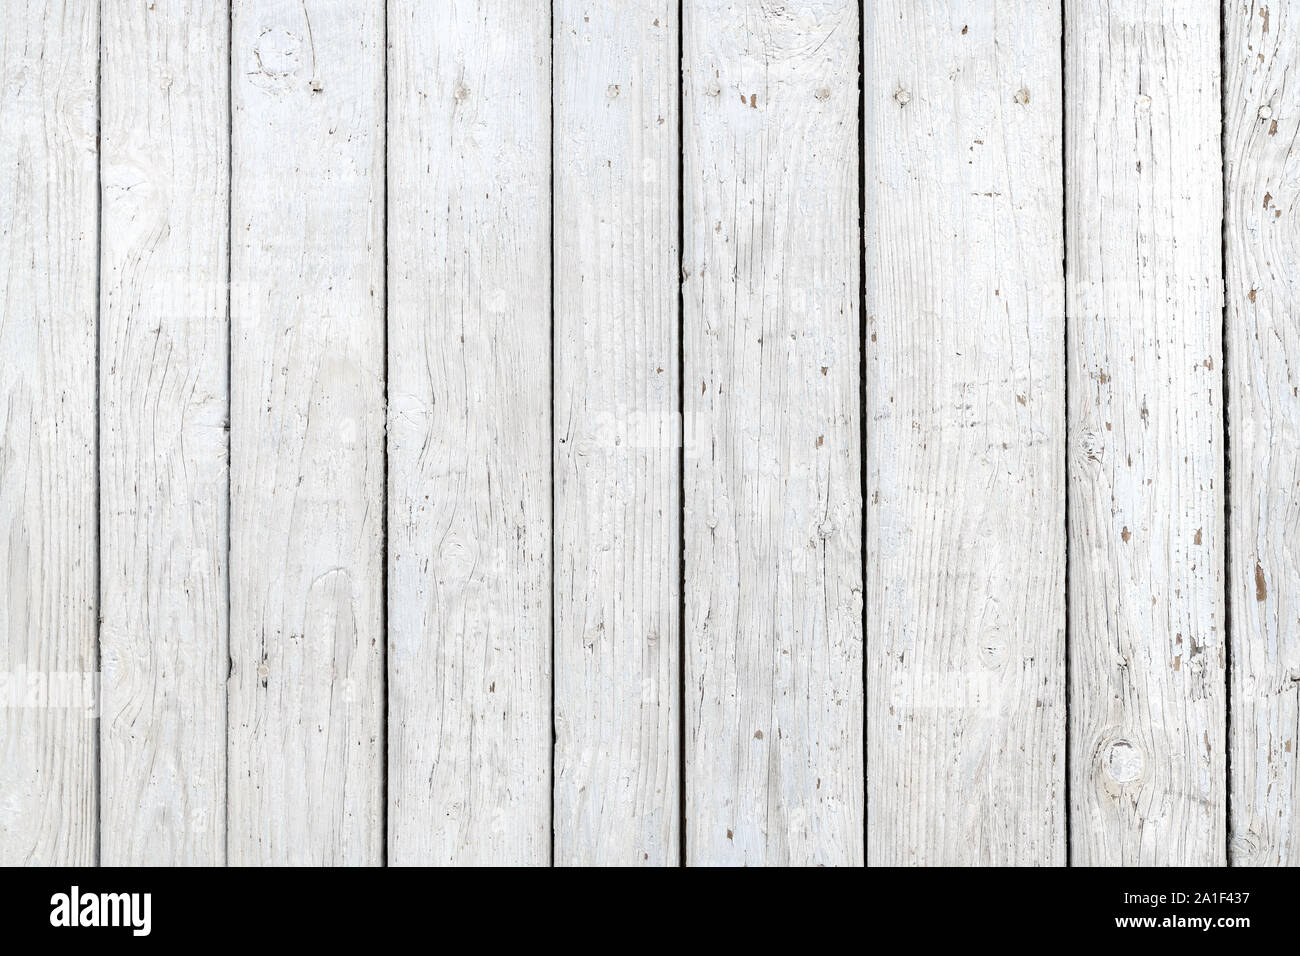 White wood planks background, detailed texture of worn wooden surface Stock Photo